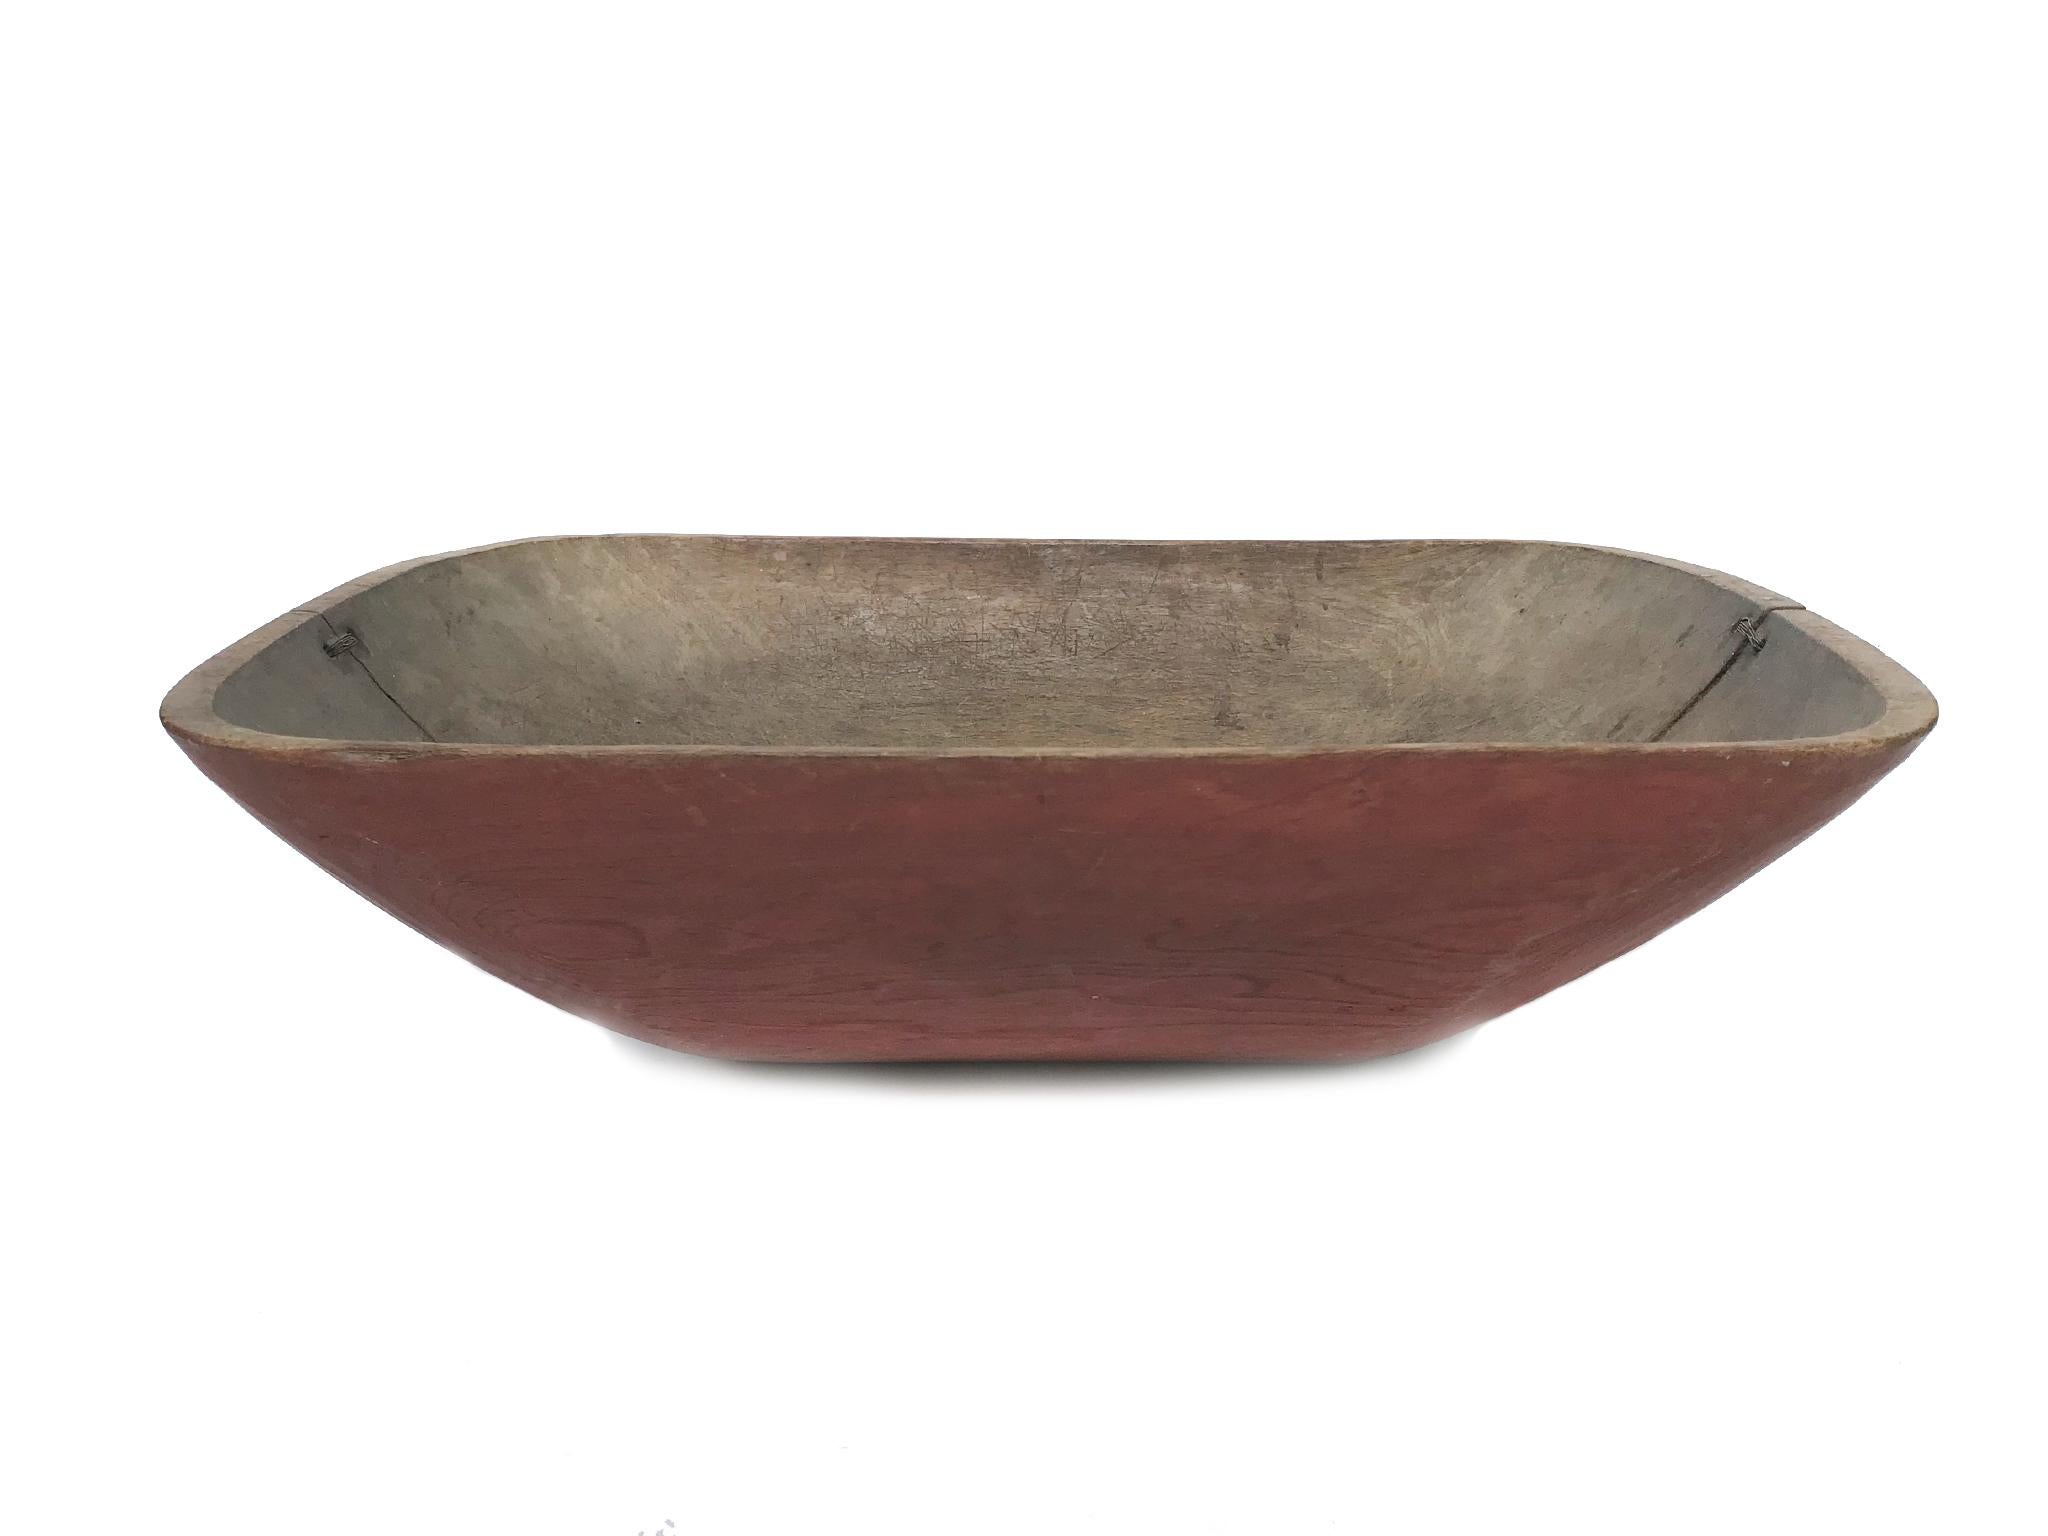 An antique wooden bowl. Hand-carved with a coat of pale red paint on the exterior. The bowl is an artifact that has aged beautifully. Its textures and wear make it a special, historical object. Noteworthy details include the two stitching at either